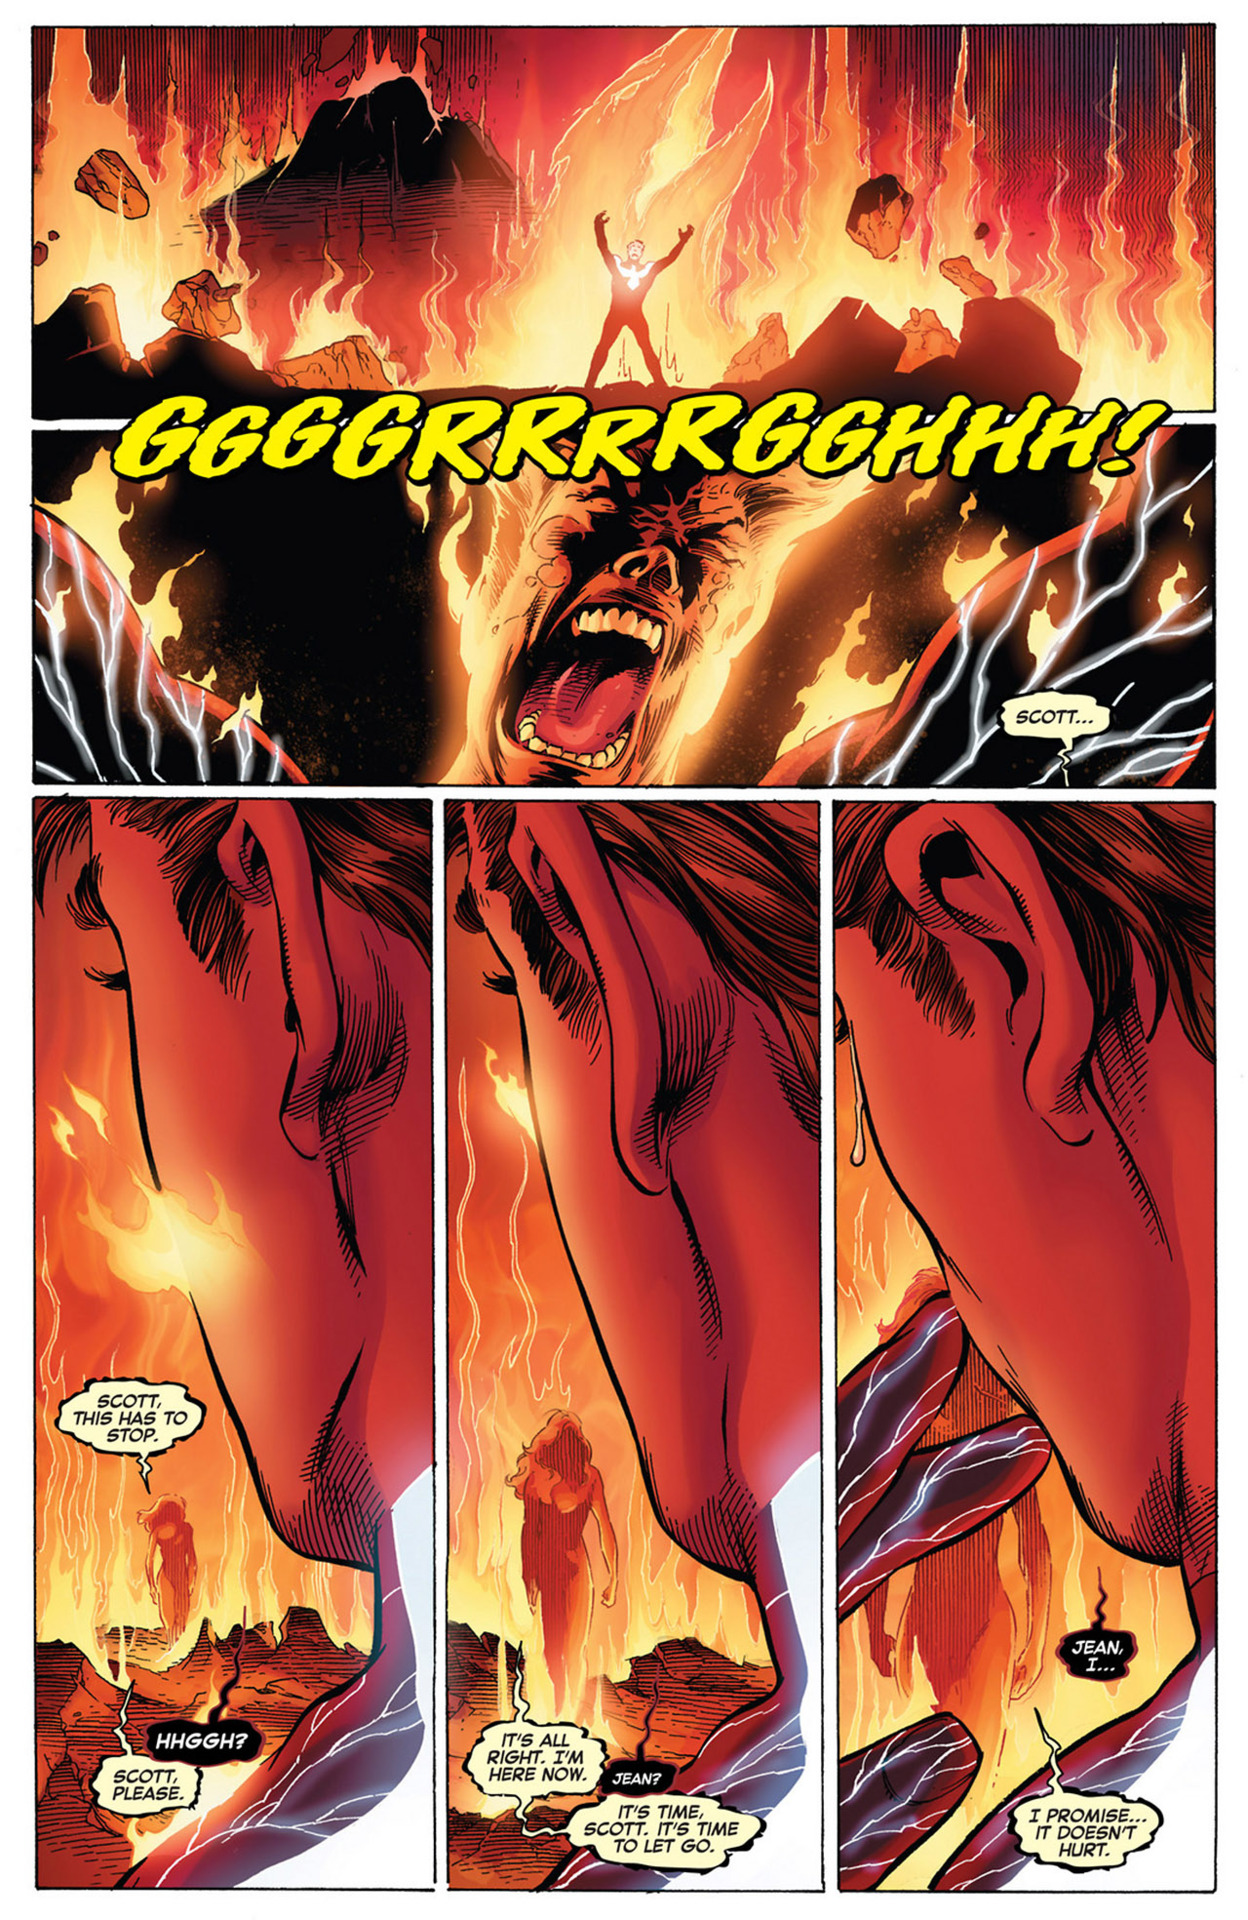 Scarlet Witch DID distracted Scott. She use her power to give him the ILLUSION of Jean in order to distract Cyclops from The Dark Phoenix, so Hope can take him down and gain the Phoenix. 